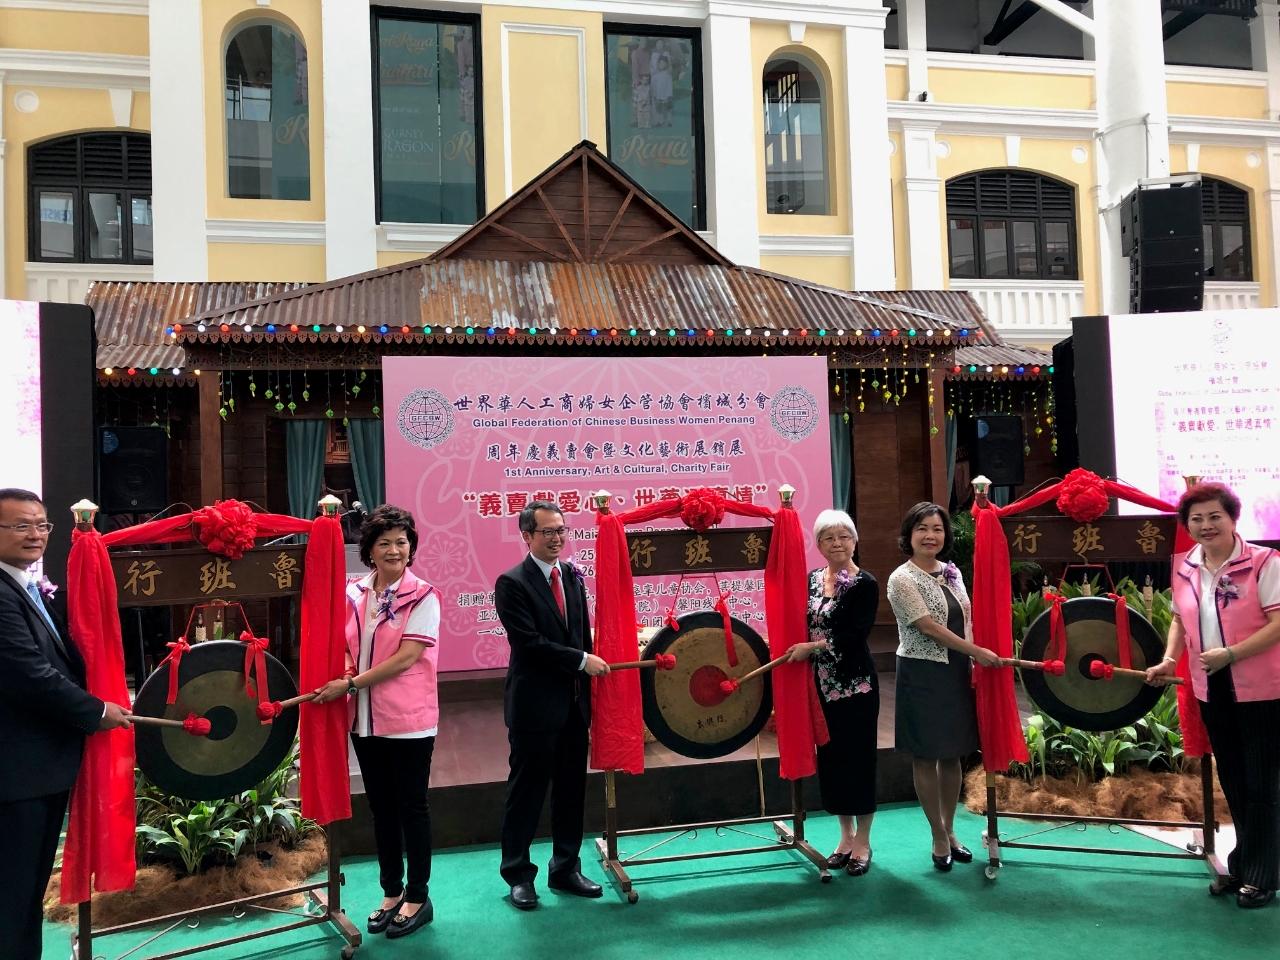 Representative Anne Hung (second from right) attends the opening ceremony of the charity bazaar.